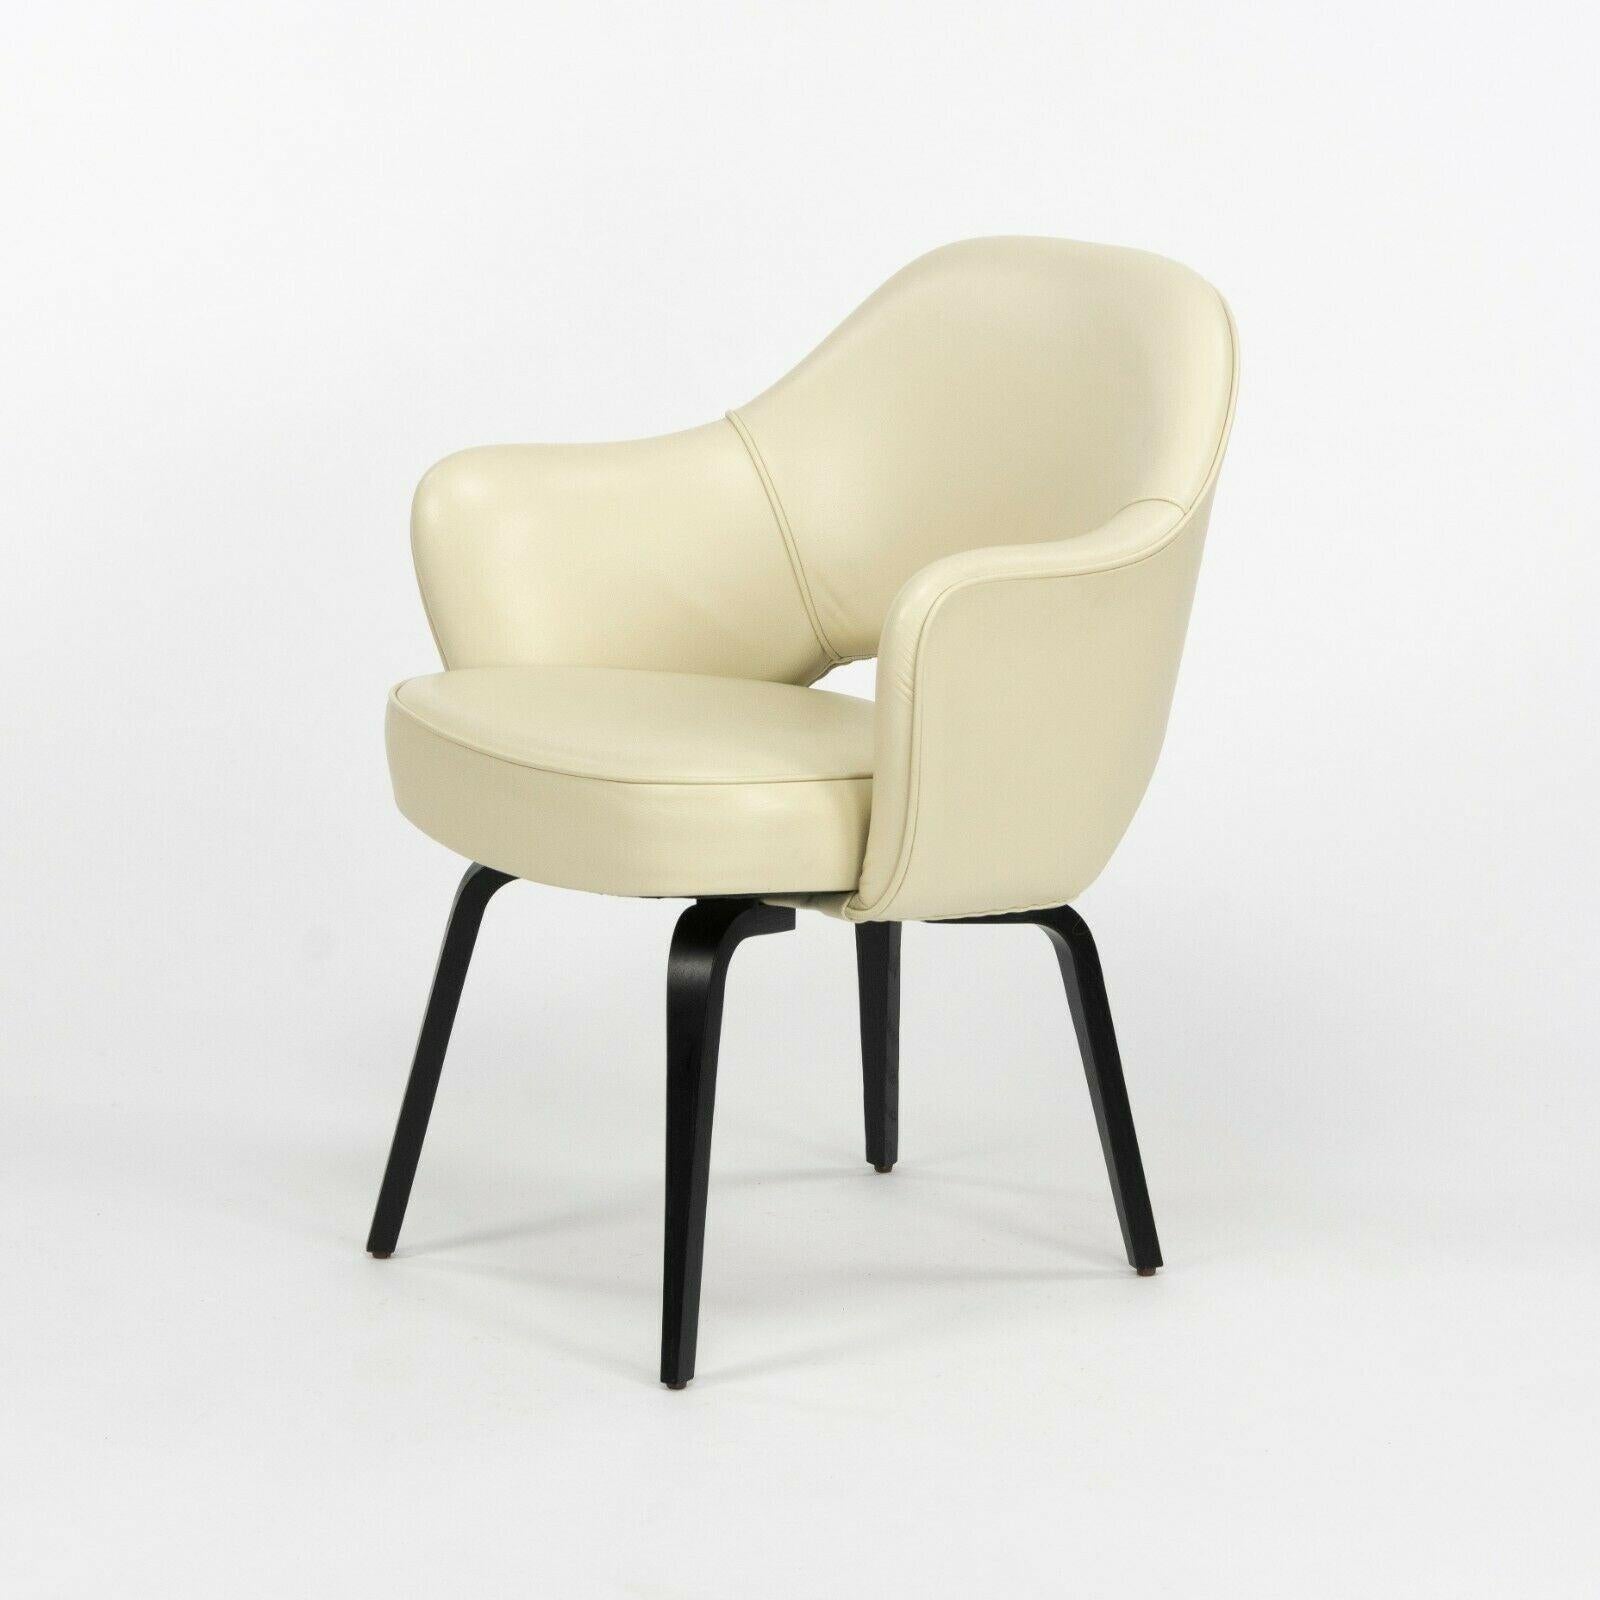 Eero Saarinen for Knoll 2020 Executive Armchair with Ivory Leather & Wood Legs For Sale 3